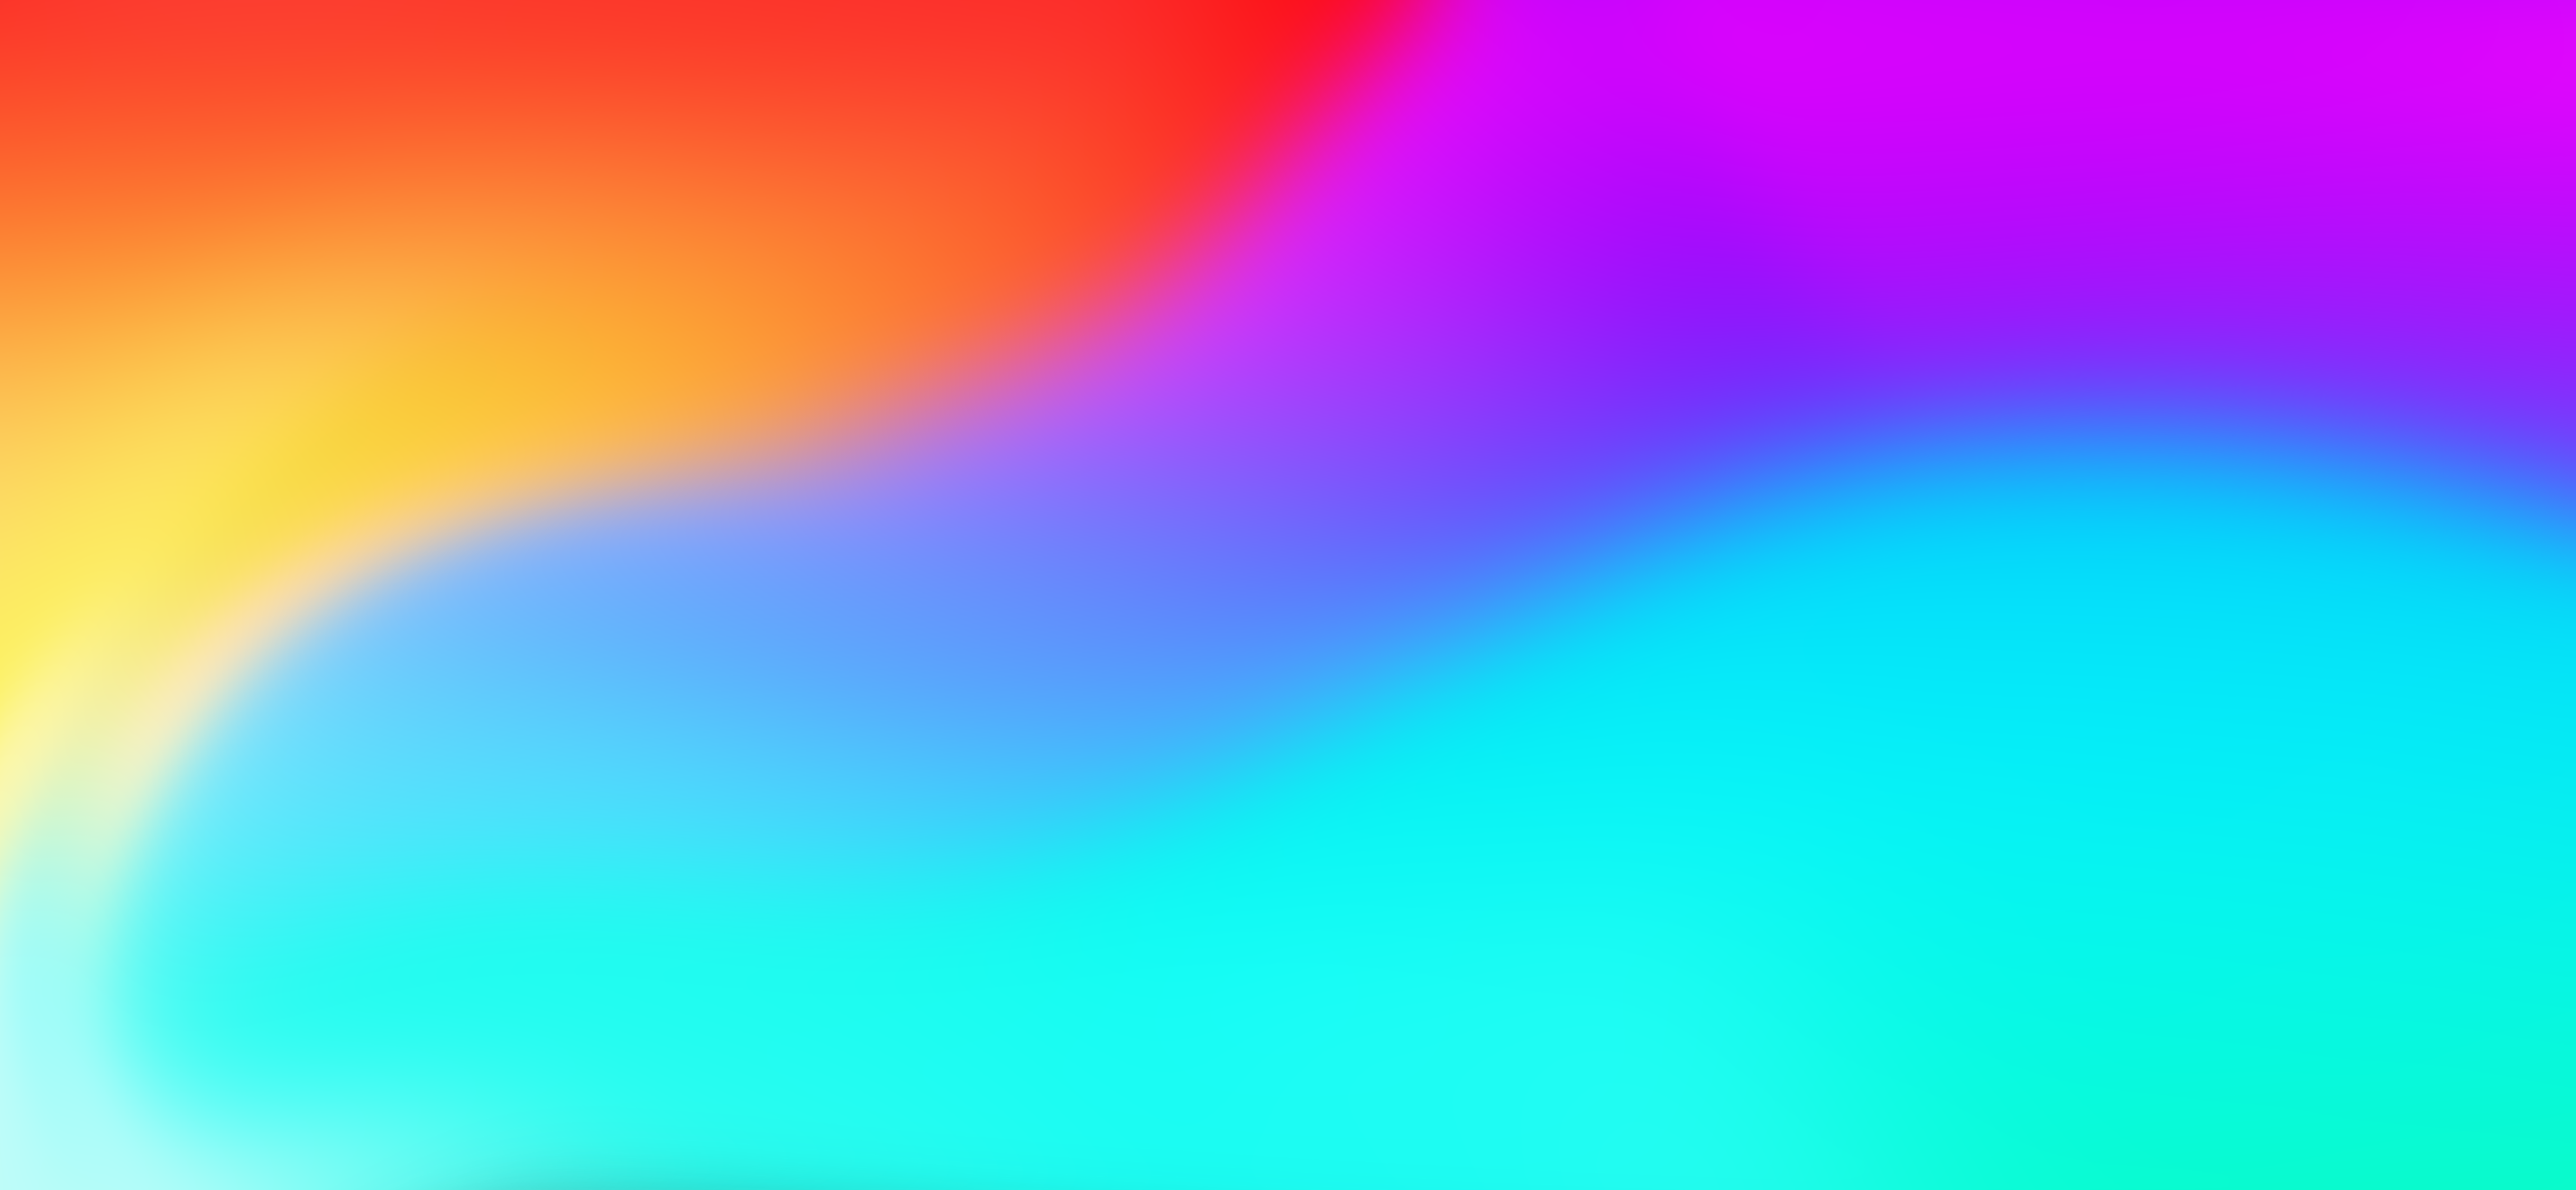 Colorful Gradient Wallpaper Free Colorful Gradient Background